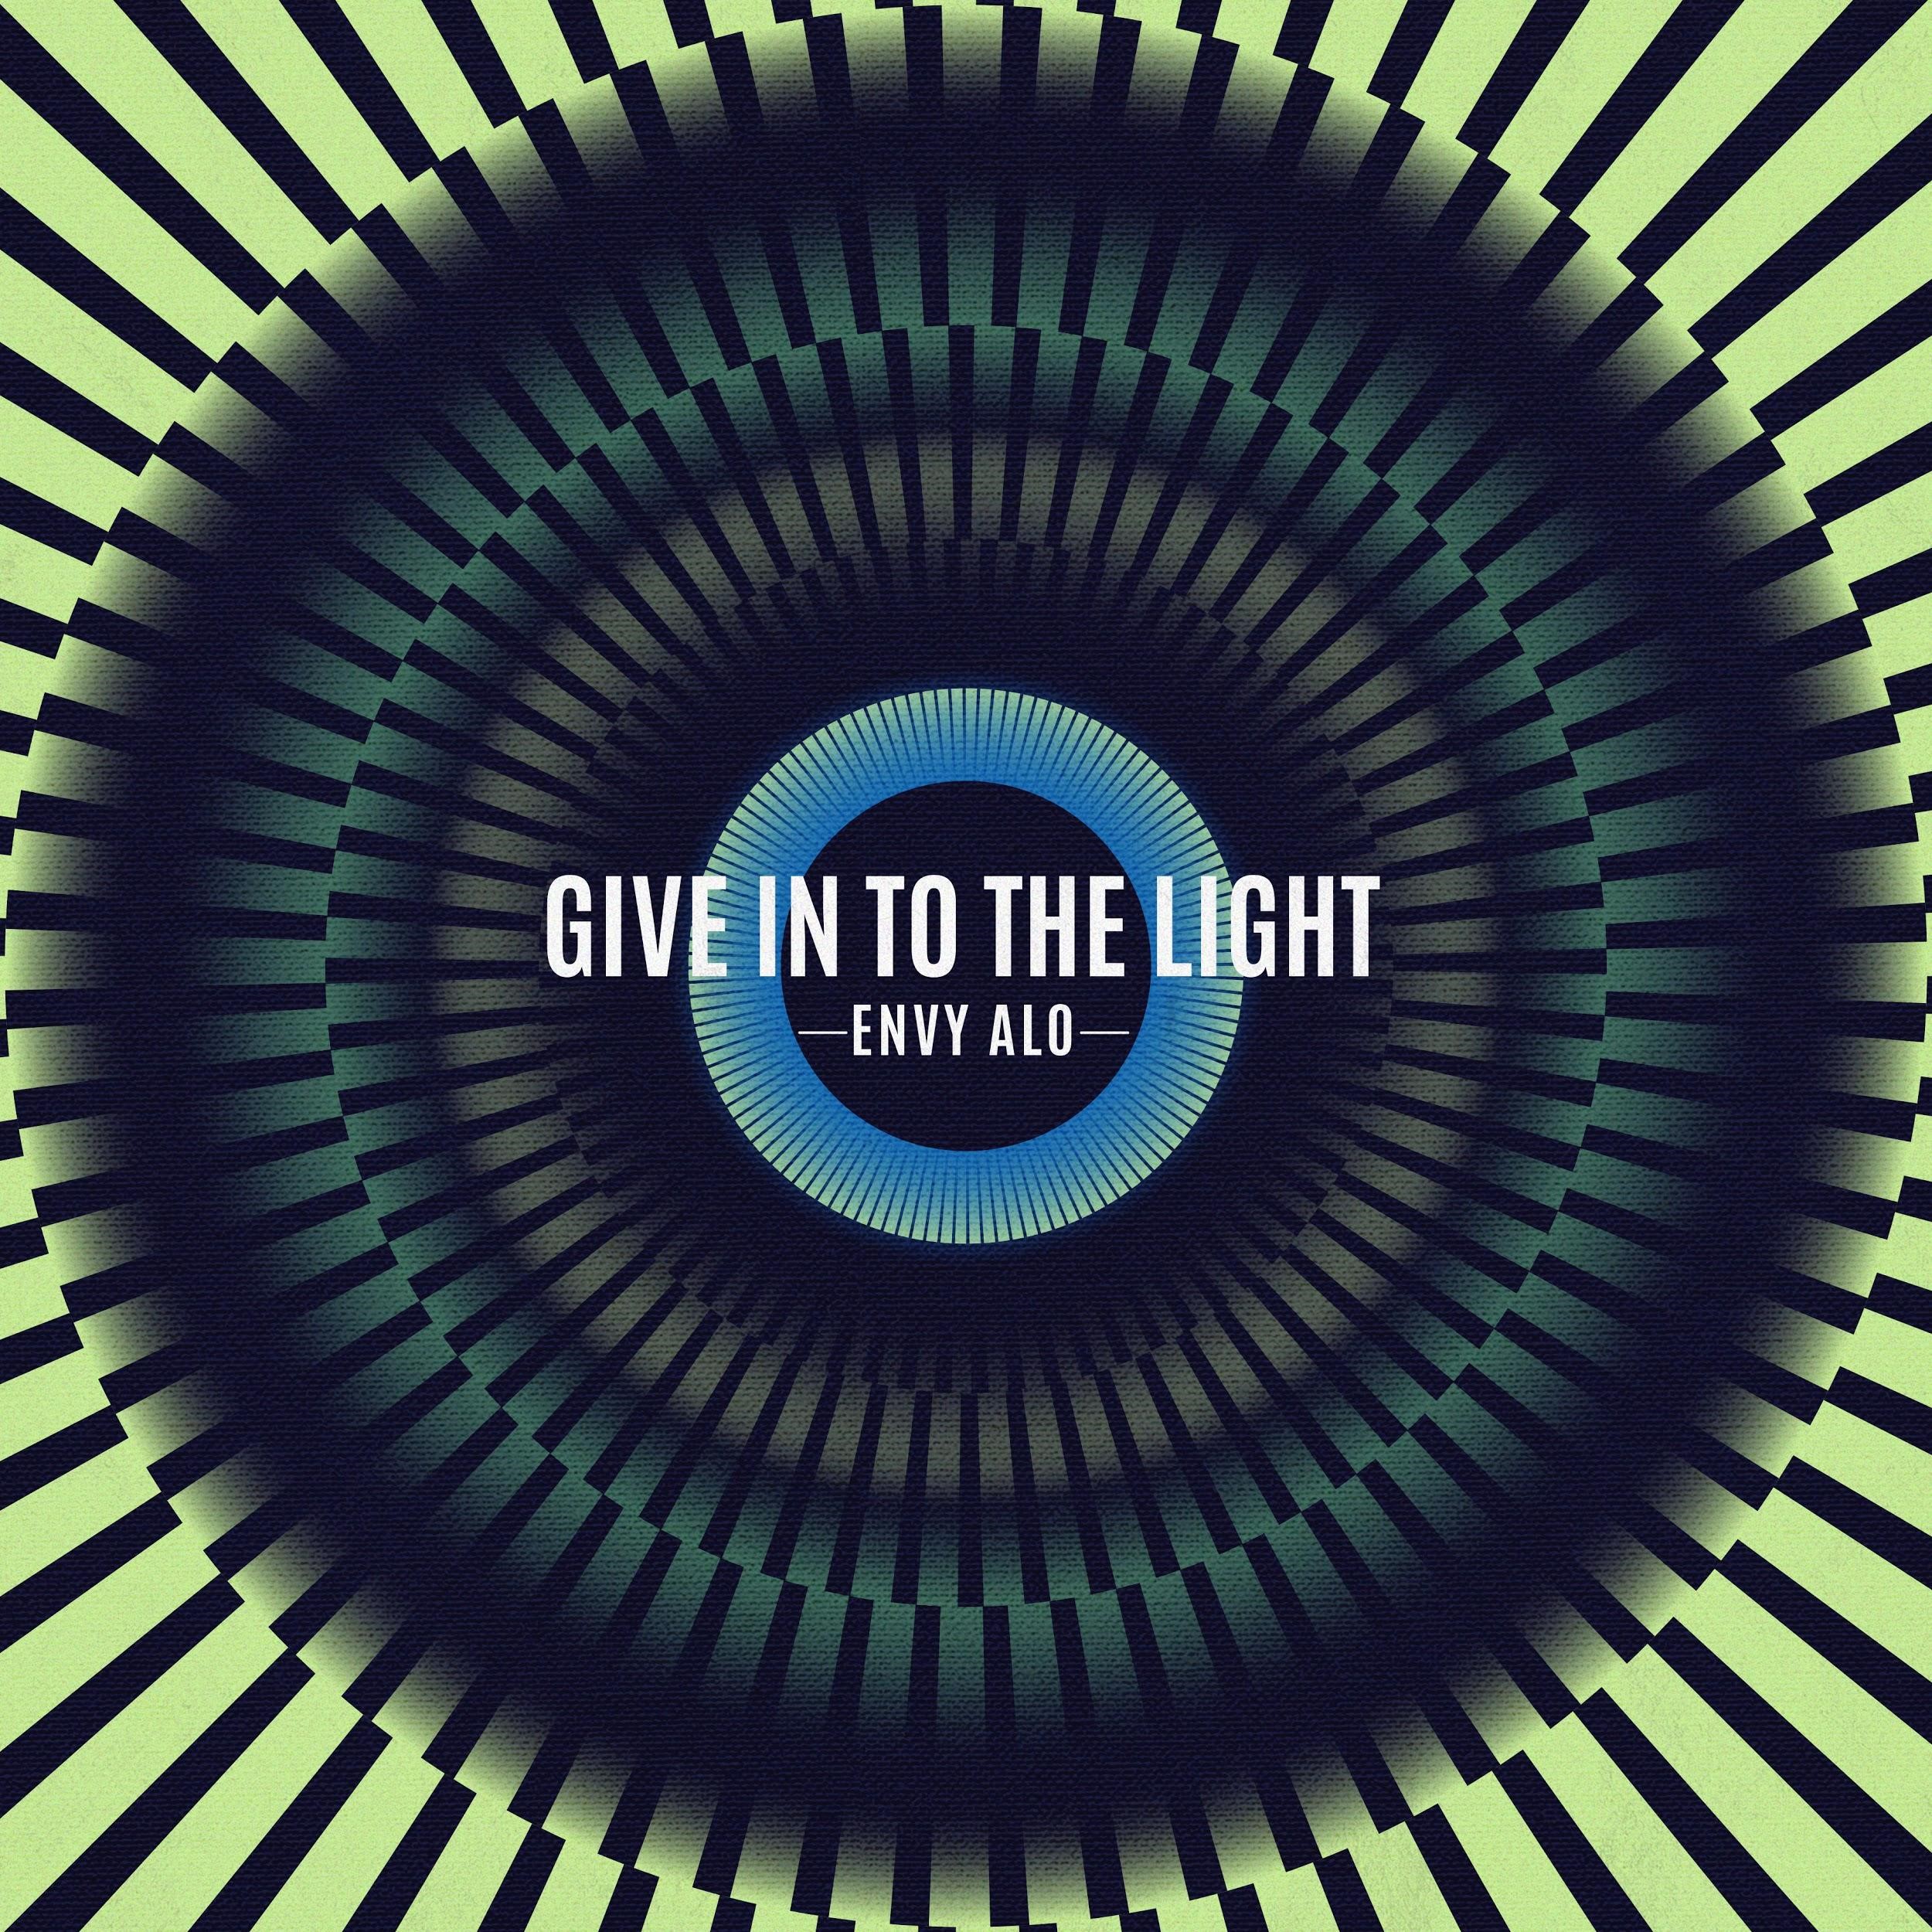 Envy Alo to Release New Single “Give in to the Light”